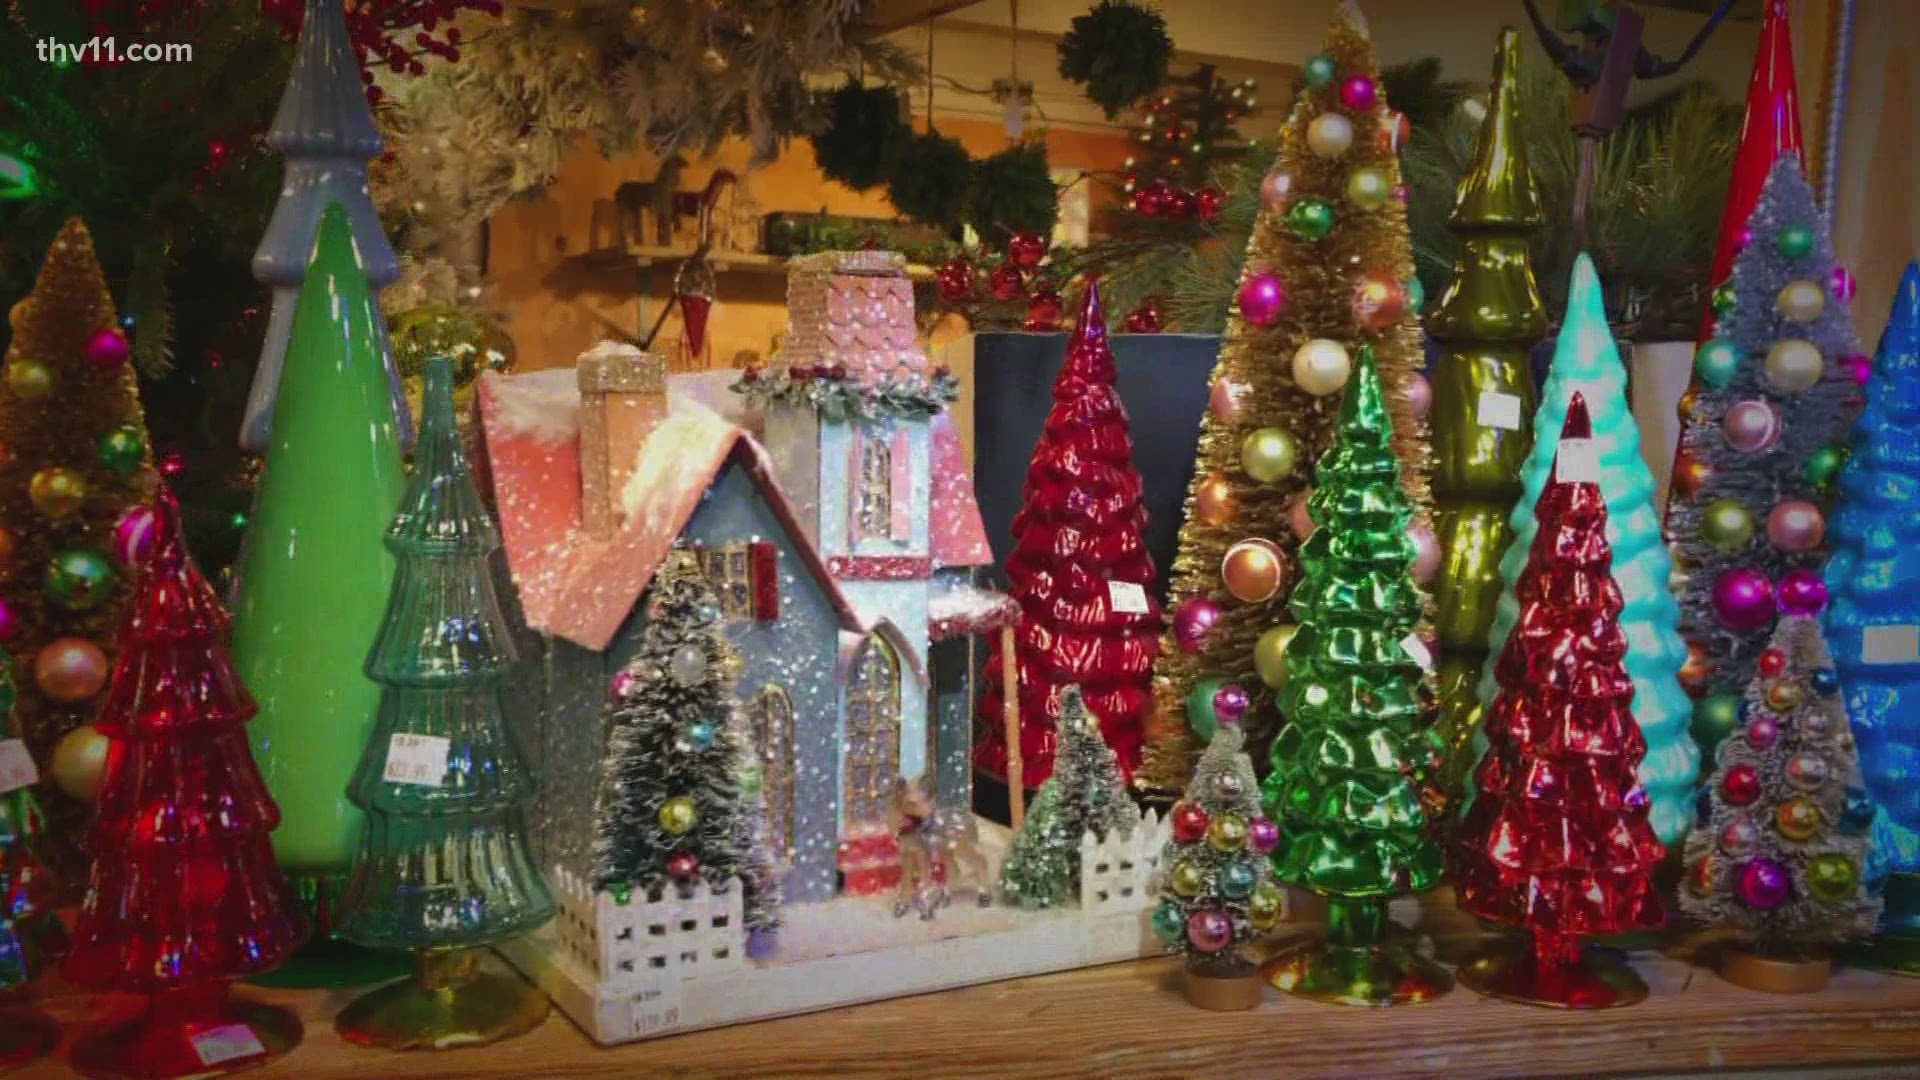 Chris Olsen shares ideas for decorating the mantel for Christmas, such as glittery Christmas houses and trees and painted logs beside the fireplace.